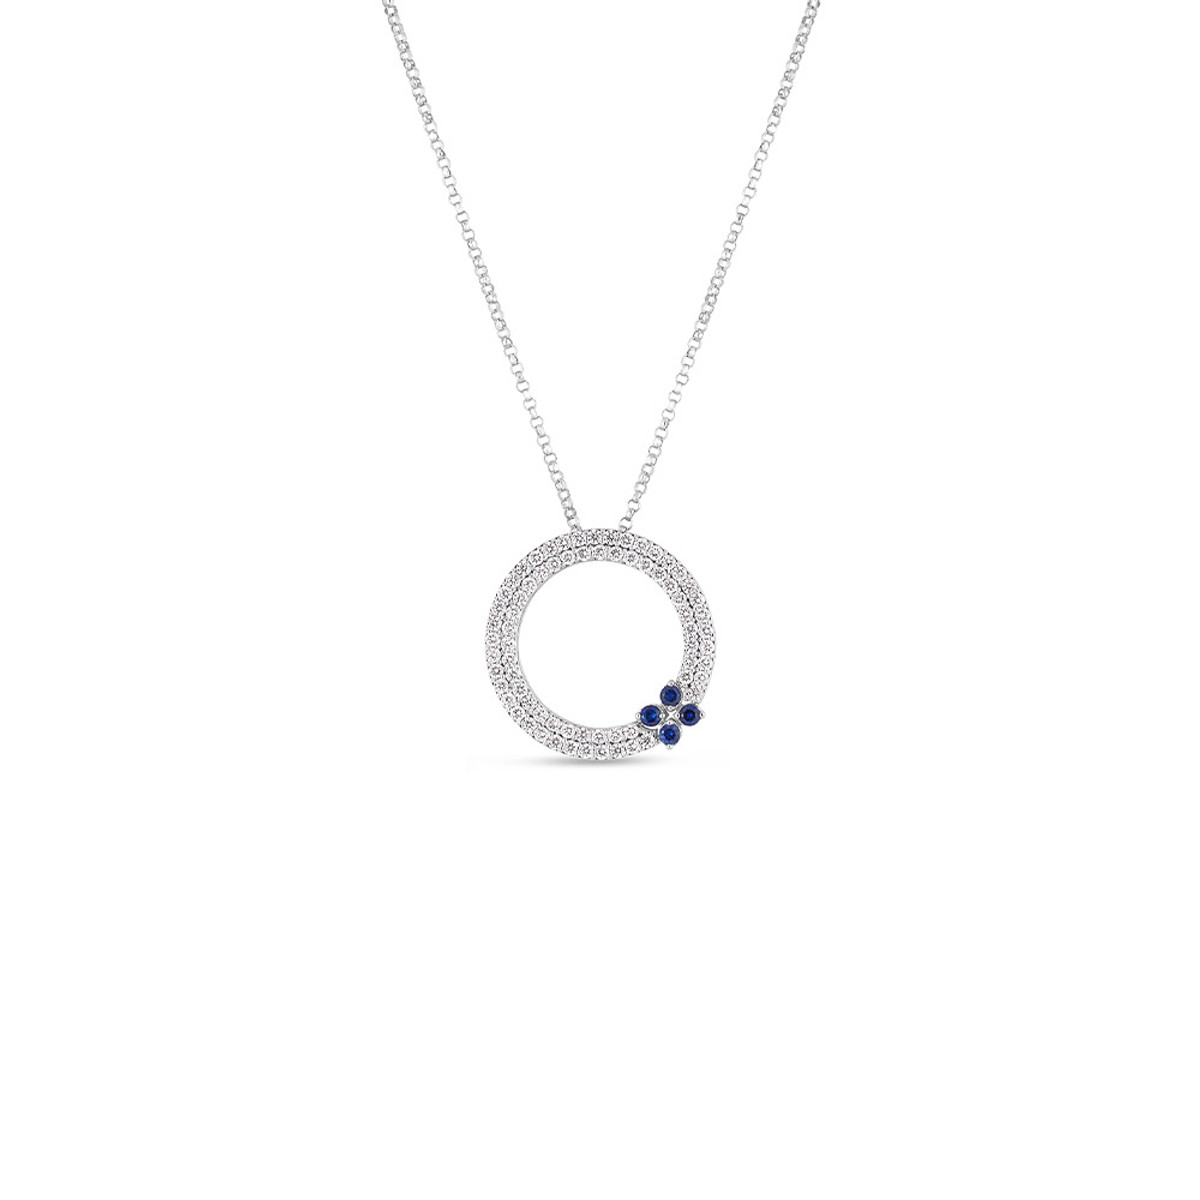 Roberto Coin 18K White Gold Love in Verona Diamond and Sapphire Necklace-57384 Product Image